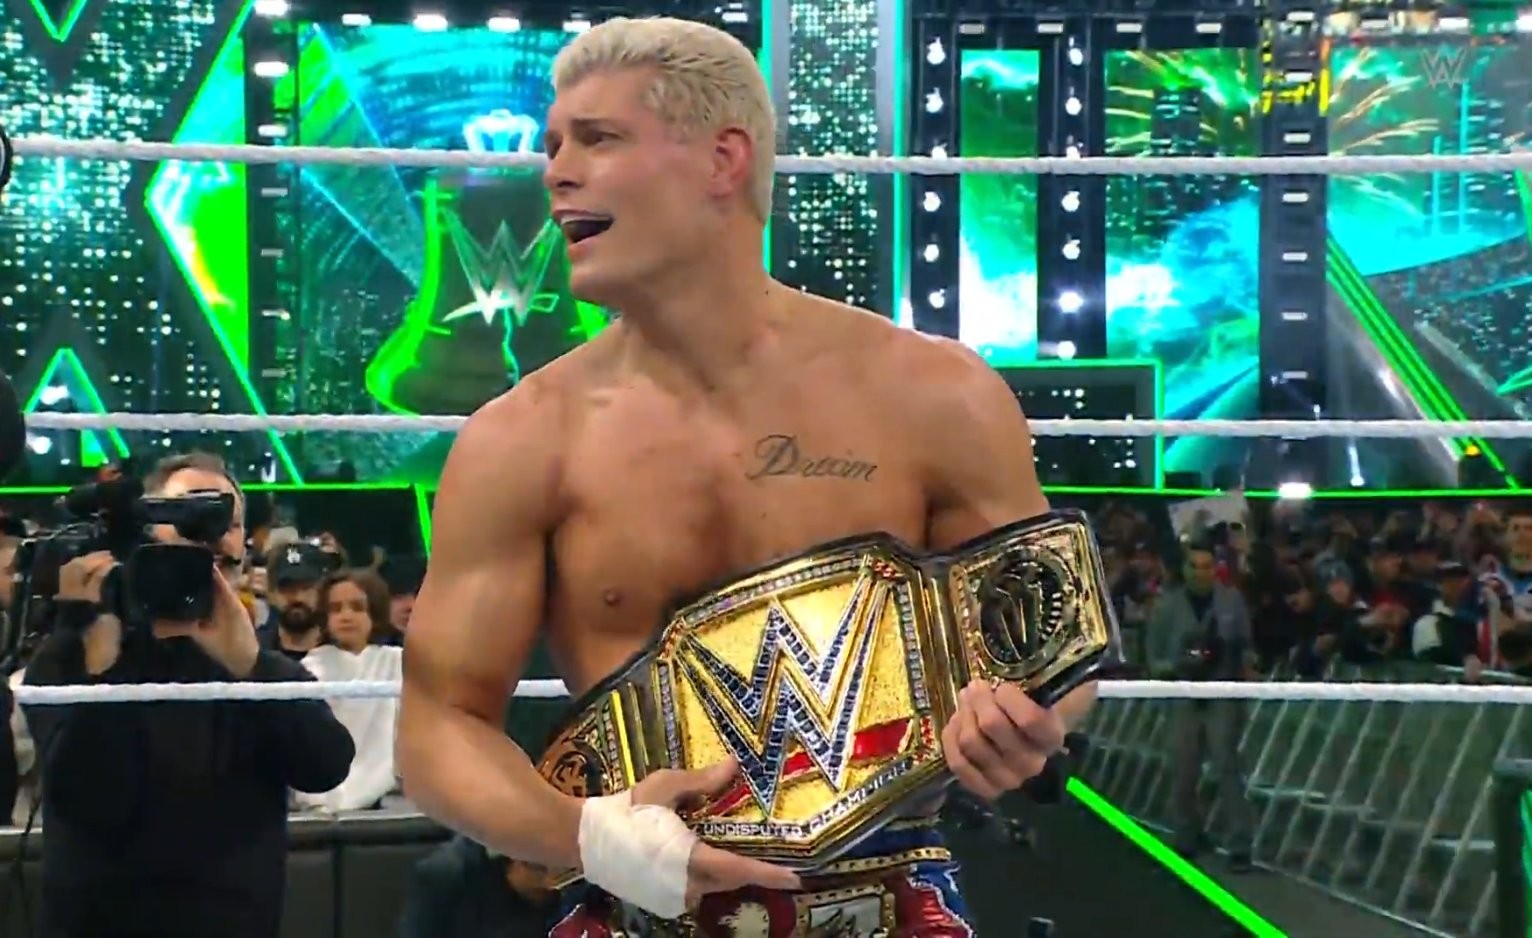 Cody Rhodes won the Undisputed WWE Universal Championship Title after defeating Roman Reigns